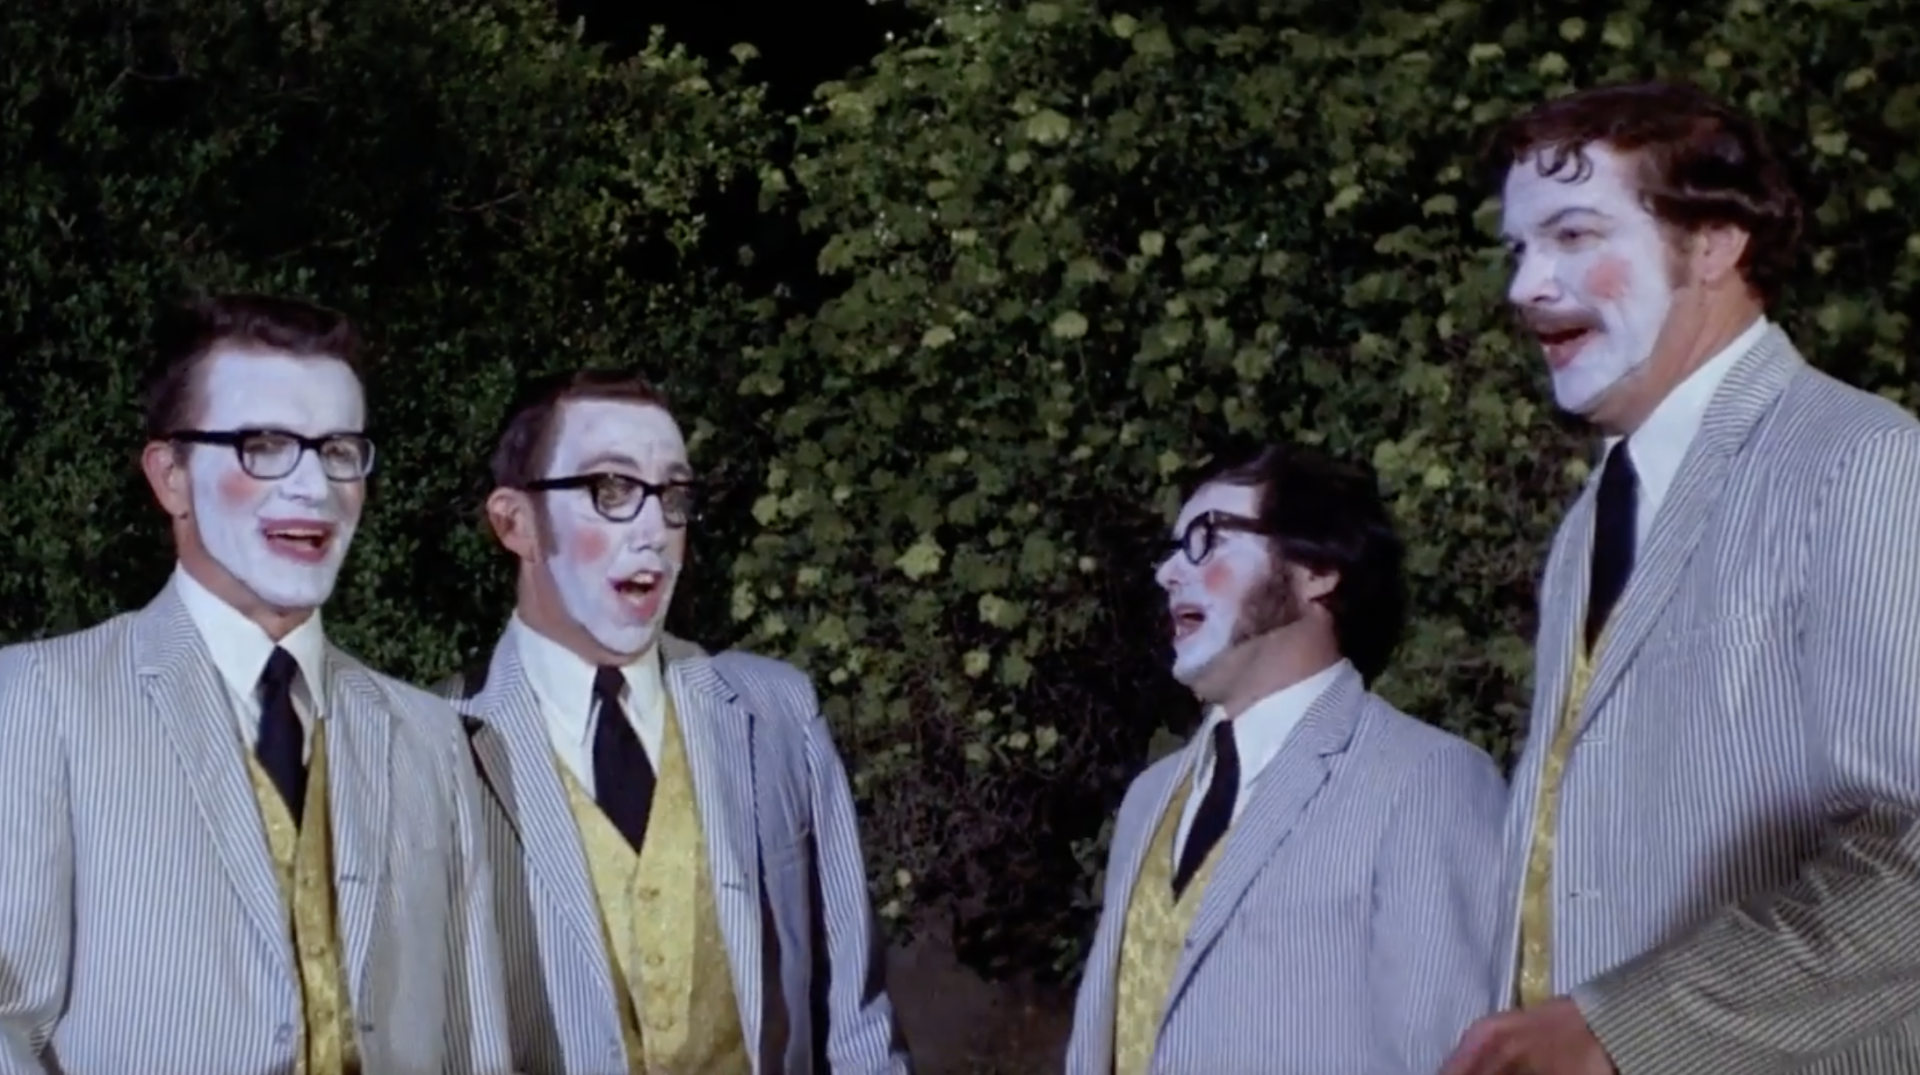 Four men in matching facepaint and grey and yellow suits sing together. They are all wearing glasses.